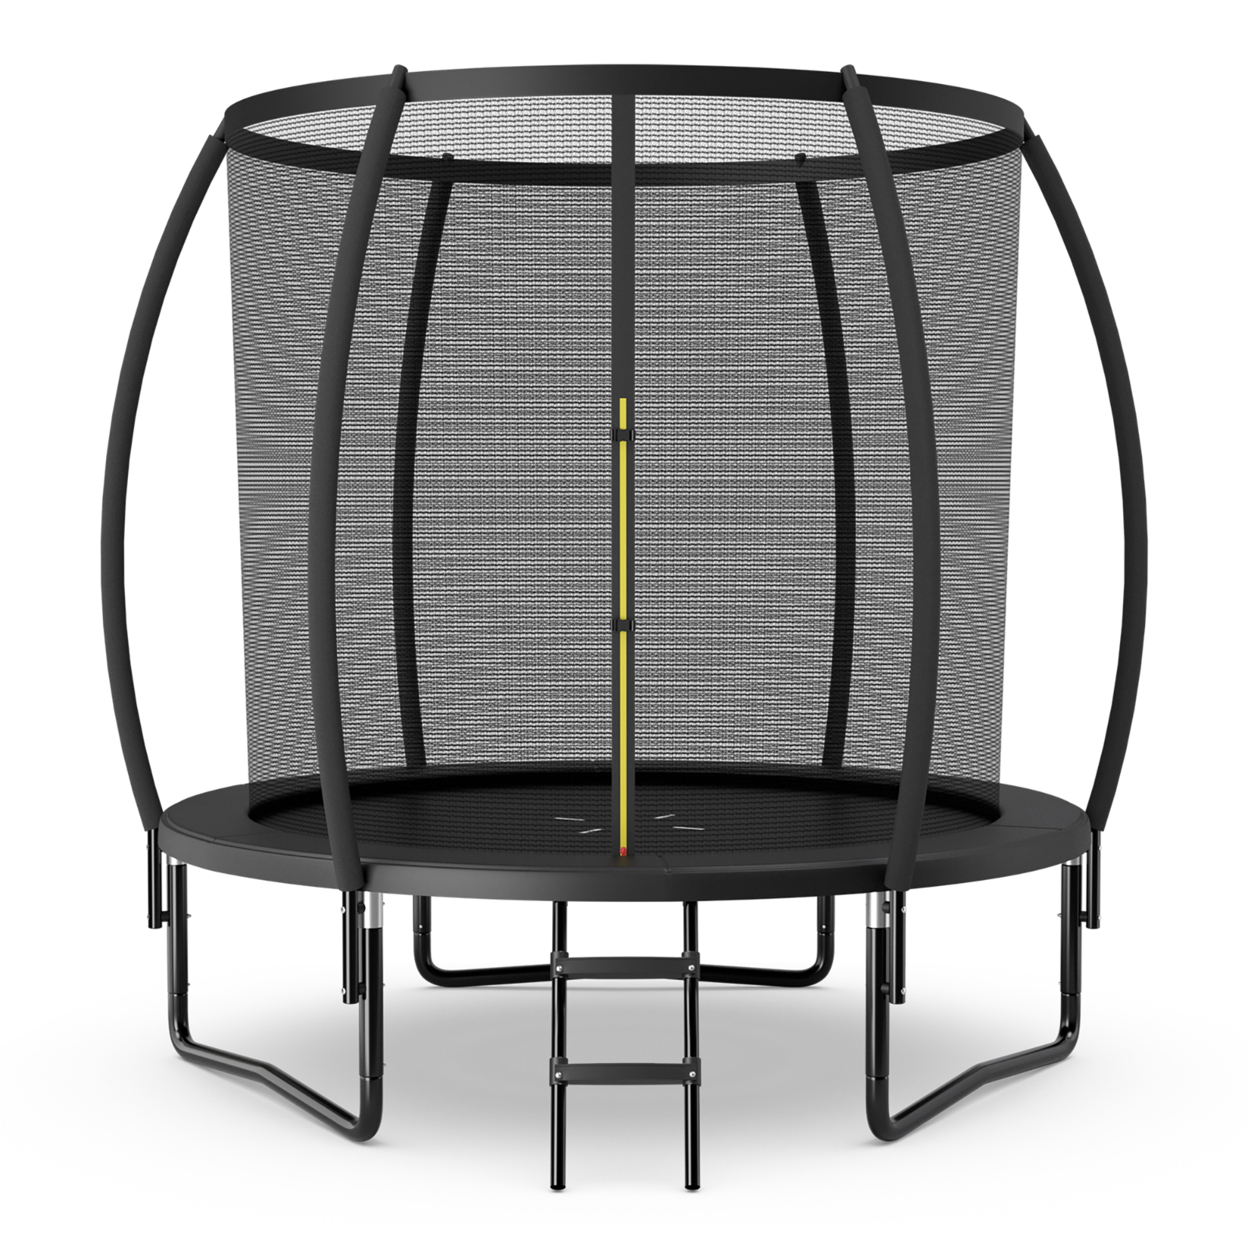 Gymax 10FT Recreational Trampoline W/ Ladder Enclosure Net Safety Pad Outdoor